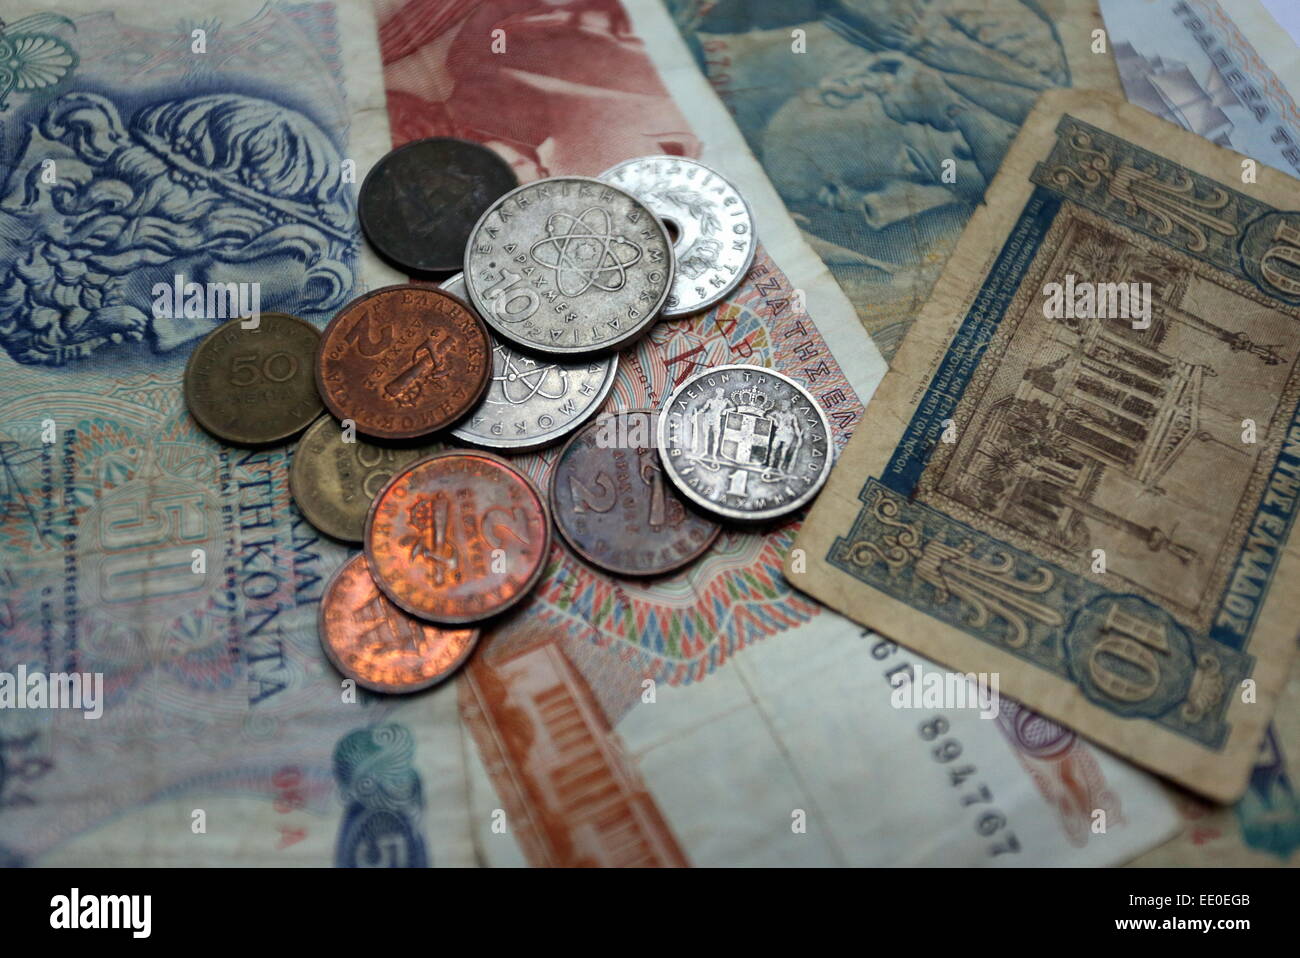 A mixture of old drachma coins and paper notes Stock Photo